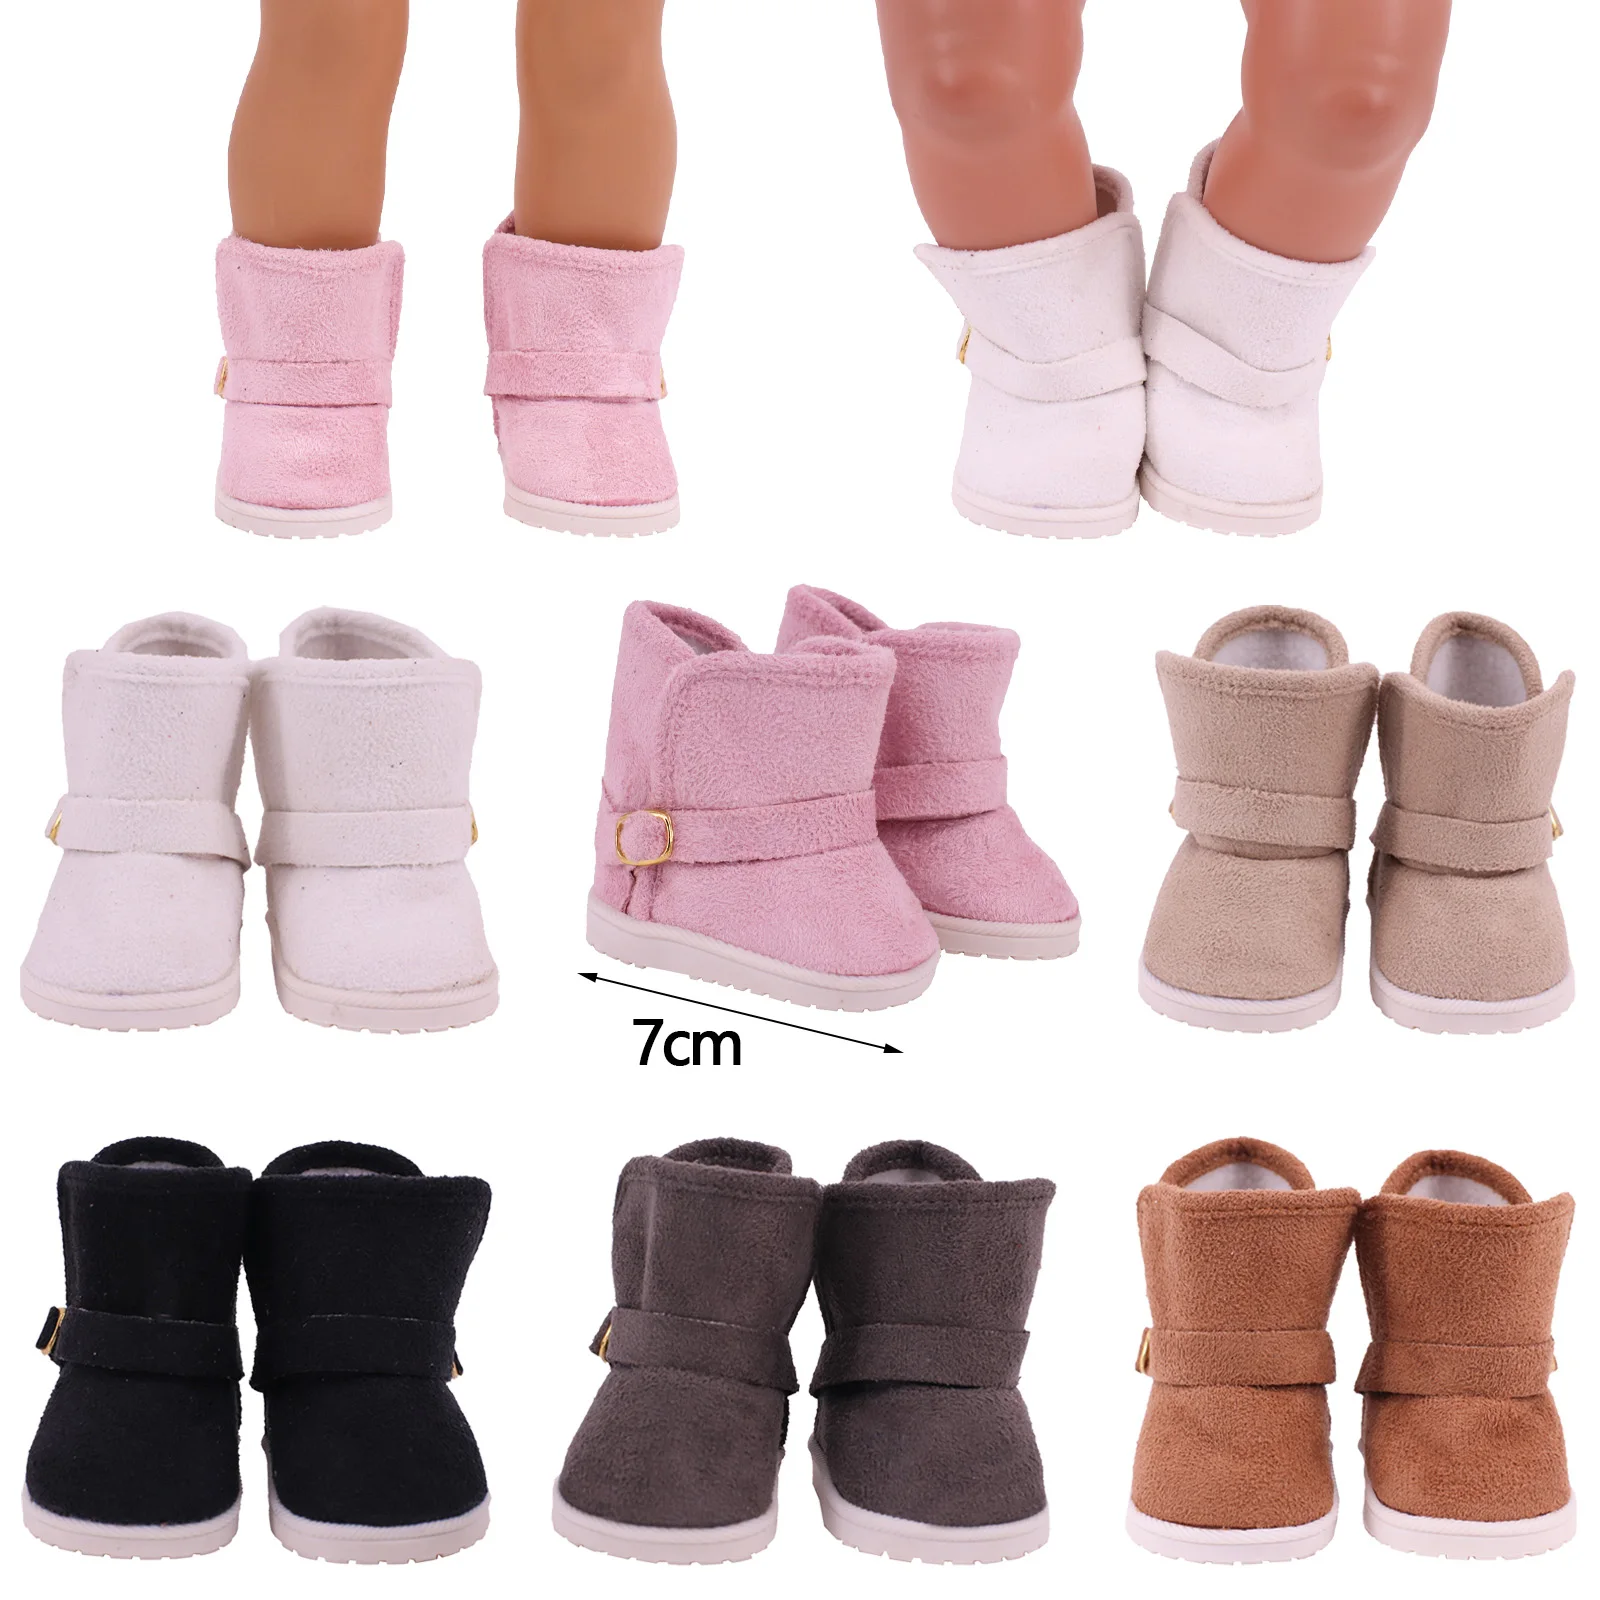 7 Cm Doll Shoes Winter Short Style Leather Plush Boots For 43 Cm New Baby Born Doll,16-18 Inch AG Girl Boy Doll Toys Accessories